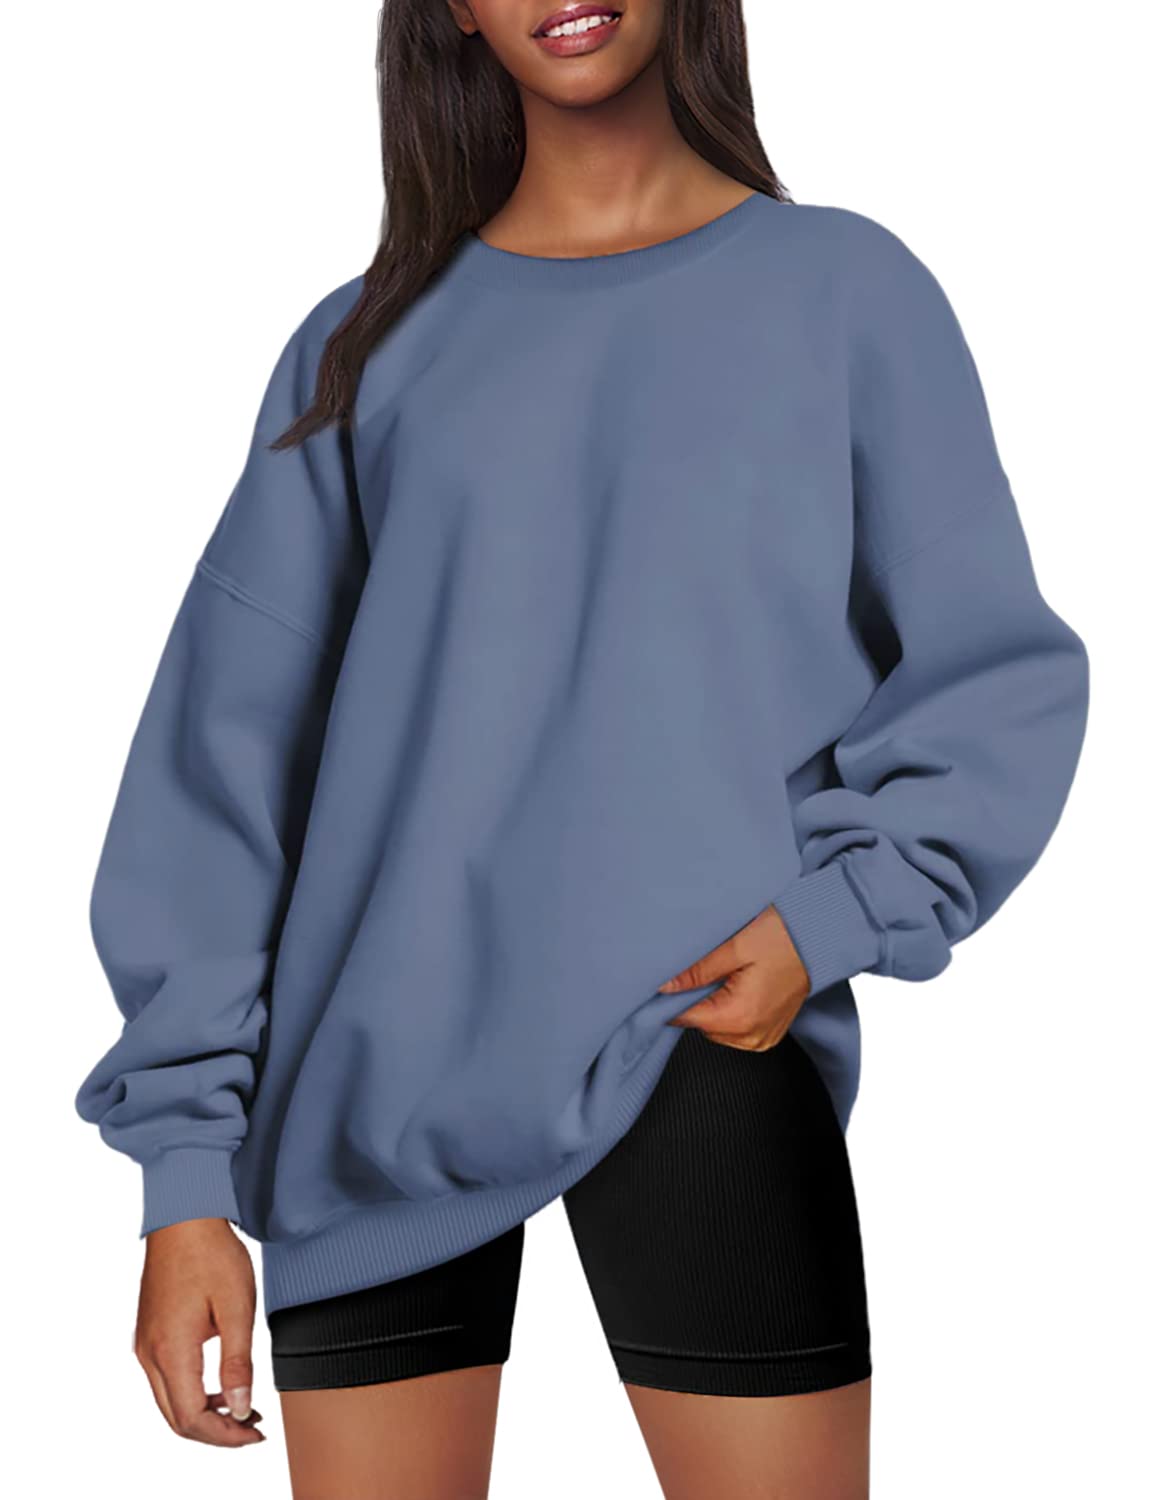 EFAN Womens Oversized Sweatshirts Hoodies Fleece Crew Neck Pullover Sweaters Casual Comfy Fall Fashion Outfits Clothes 2023